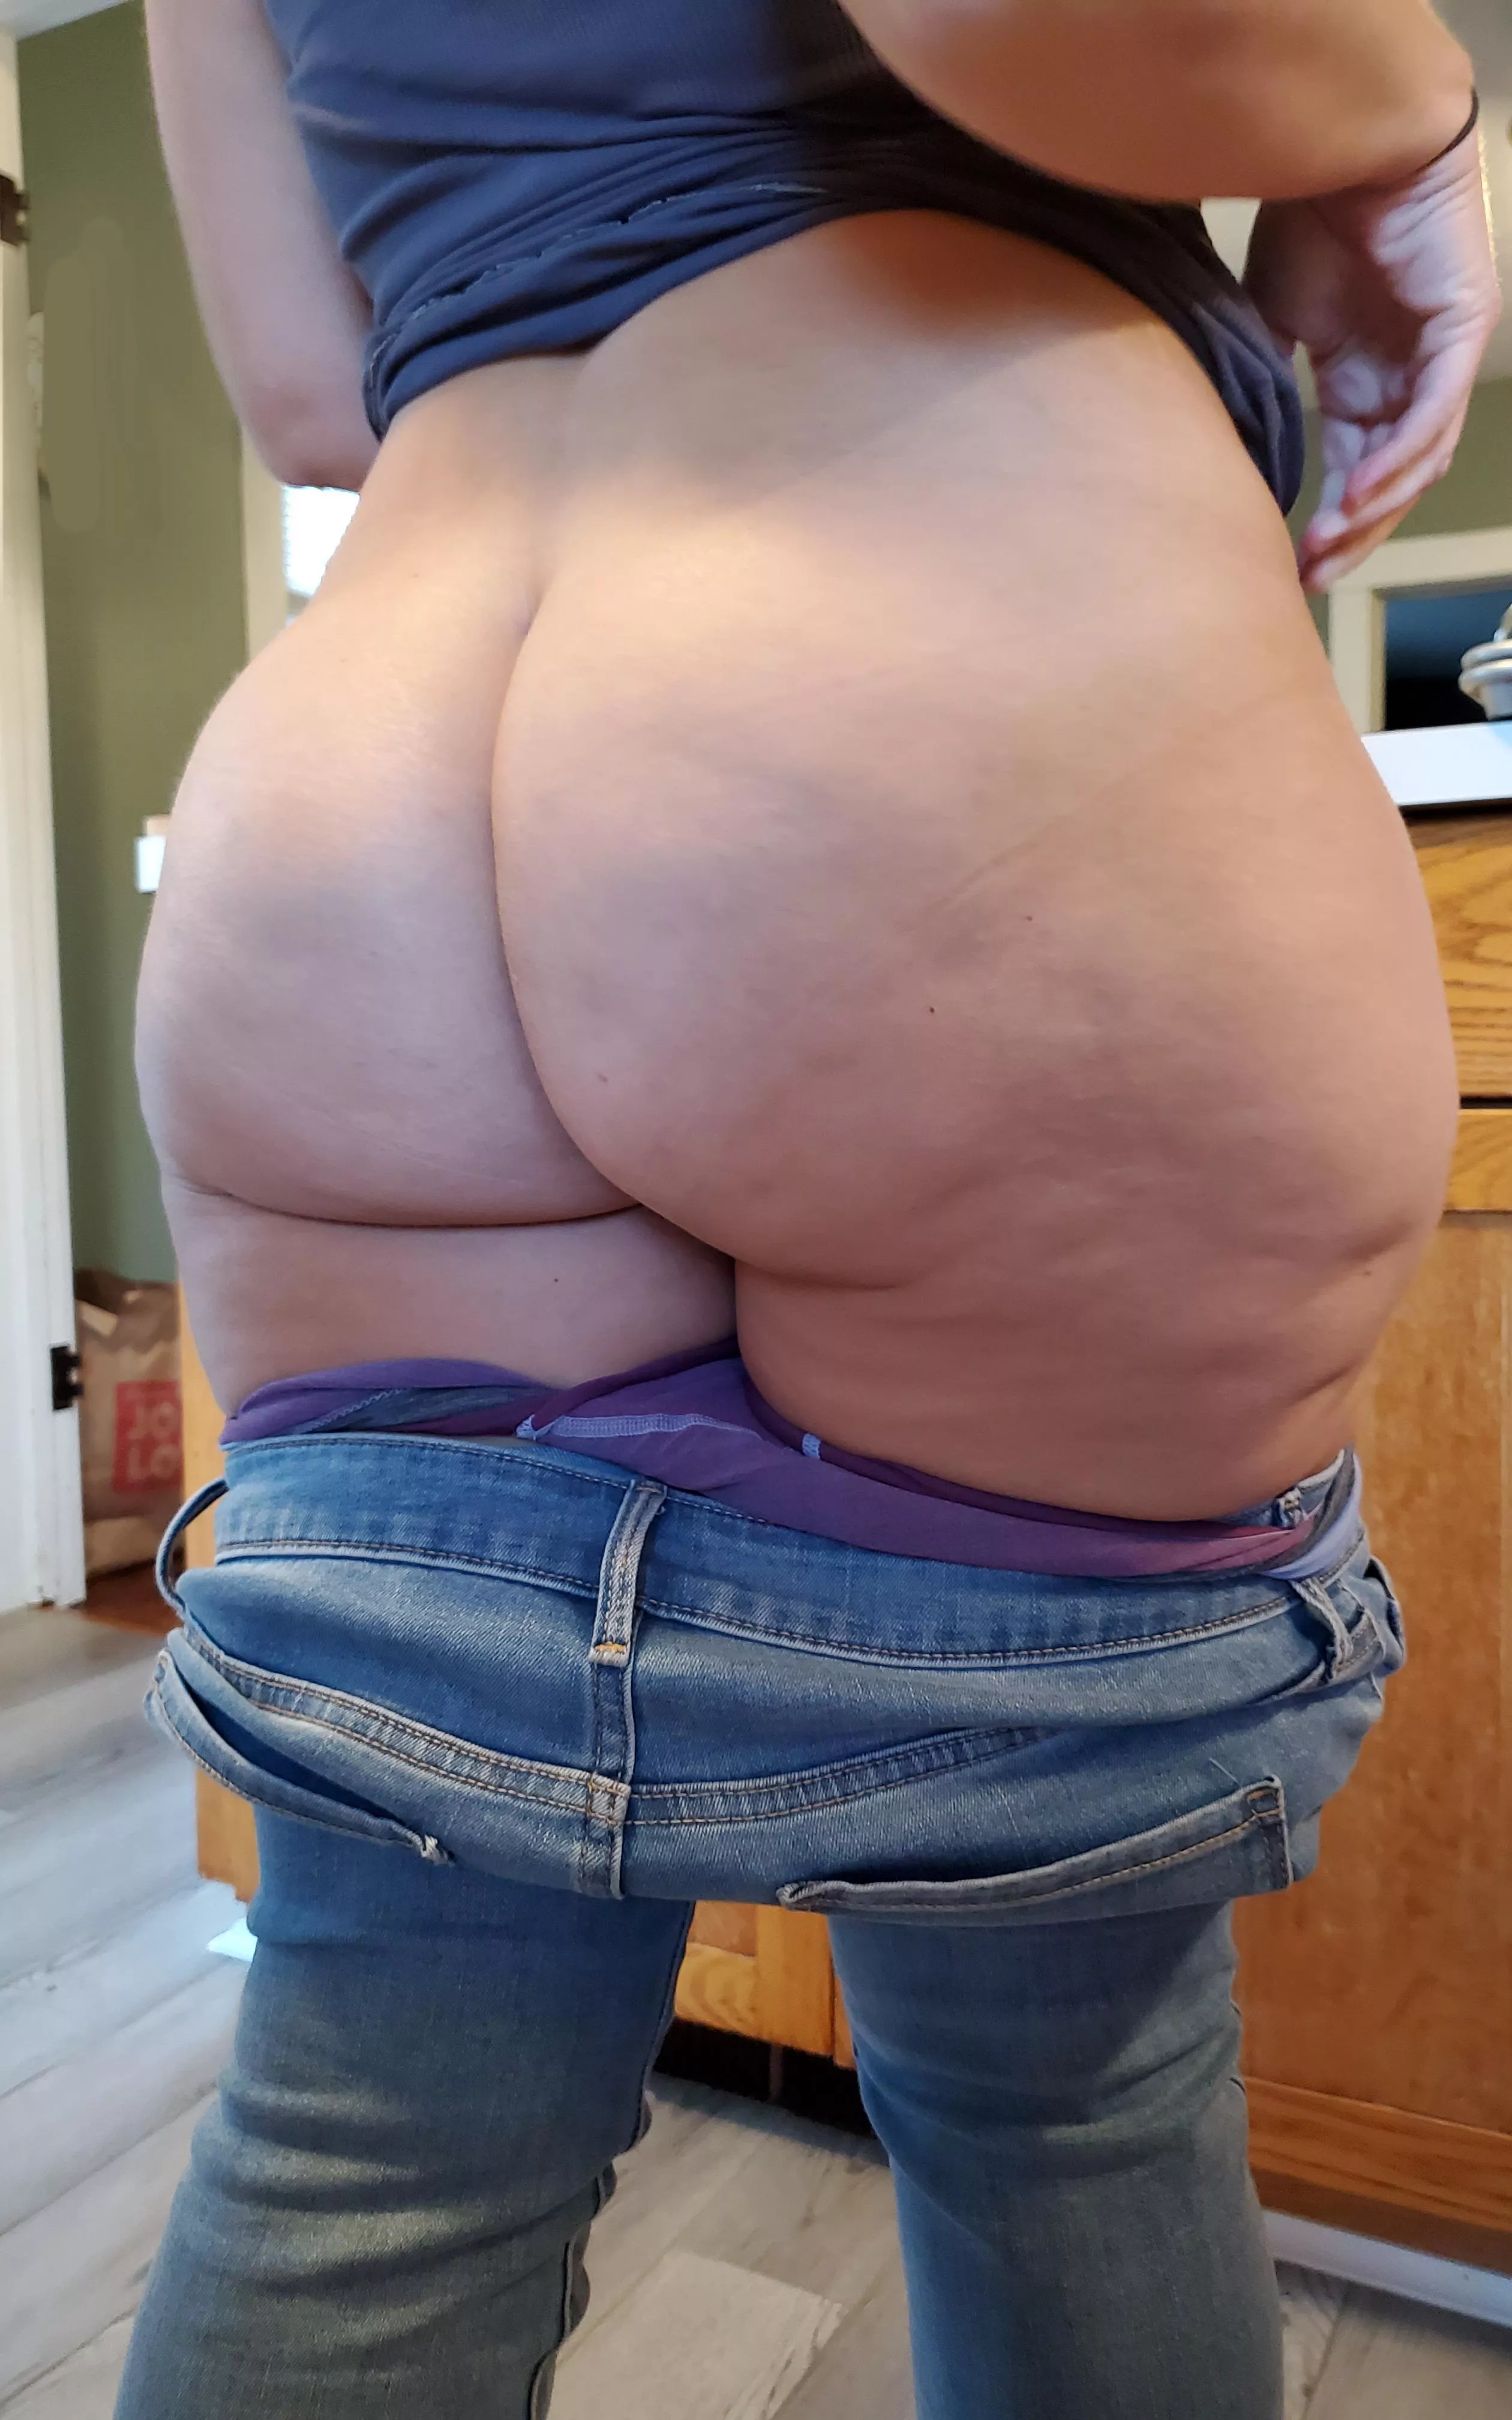 Nude Butt Chubby - Would you fuck my chubby butt?? nudes : chubby | NUDE-PICS.ORG